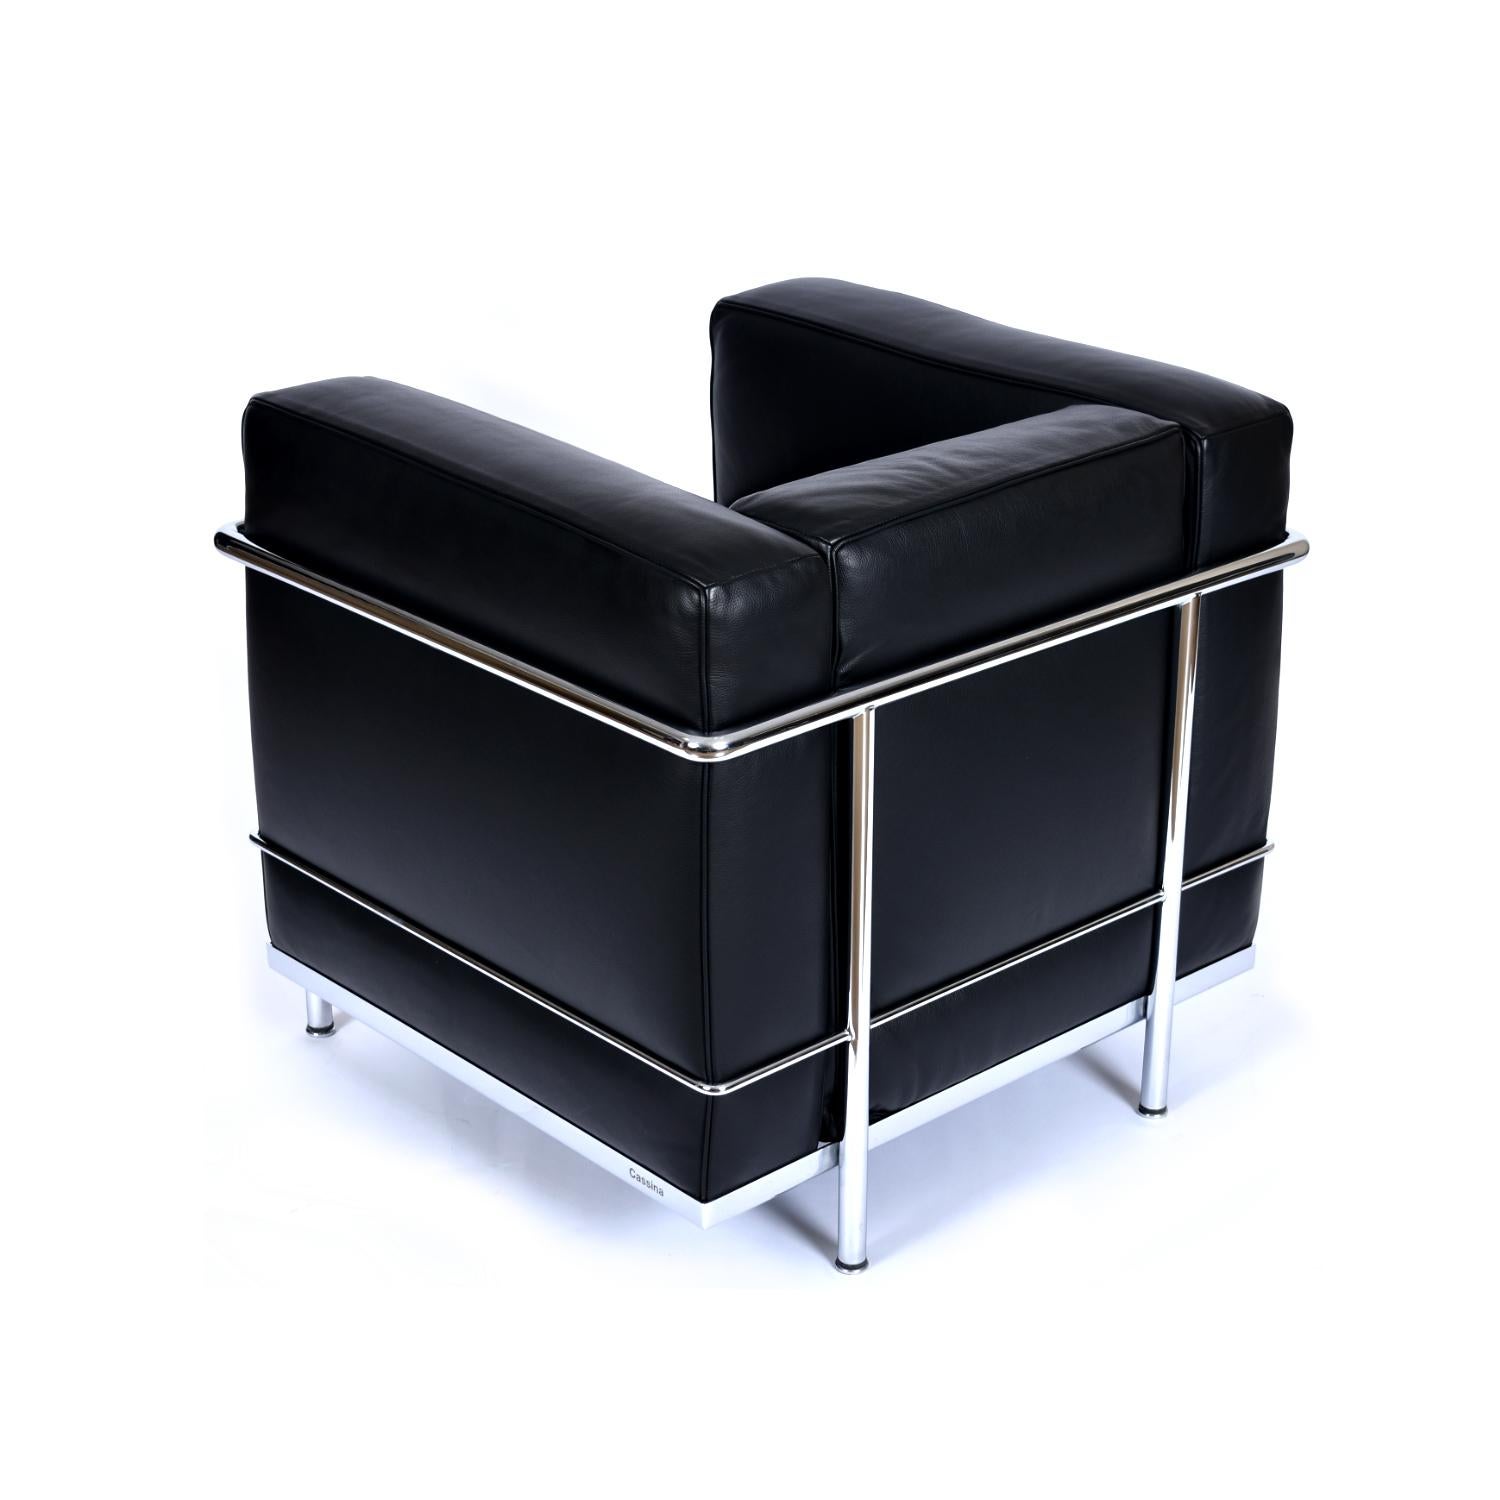 Contemporary Le Corbusier LC2 Chair by Cassina Made in Italy Chrome and Black Leather